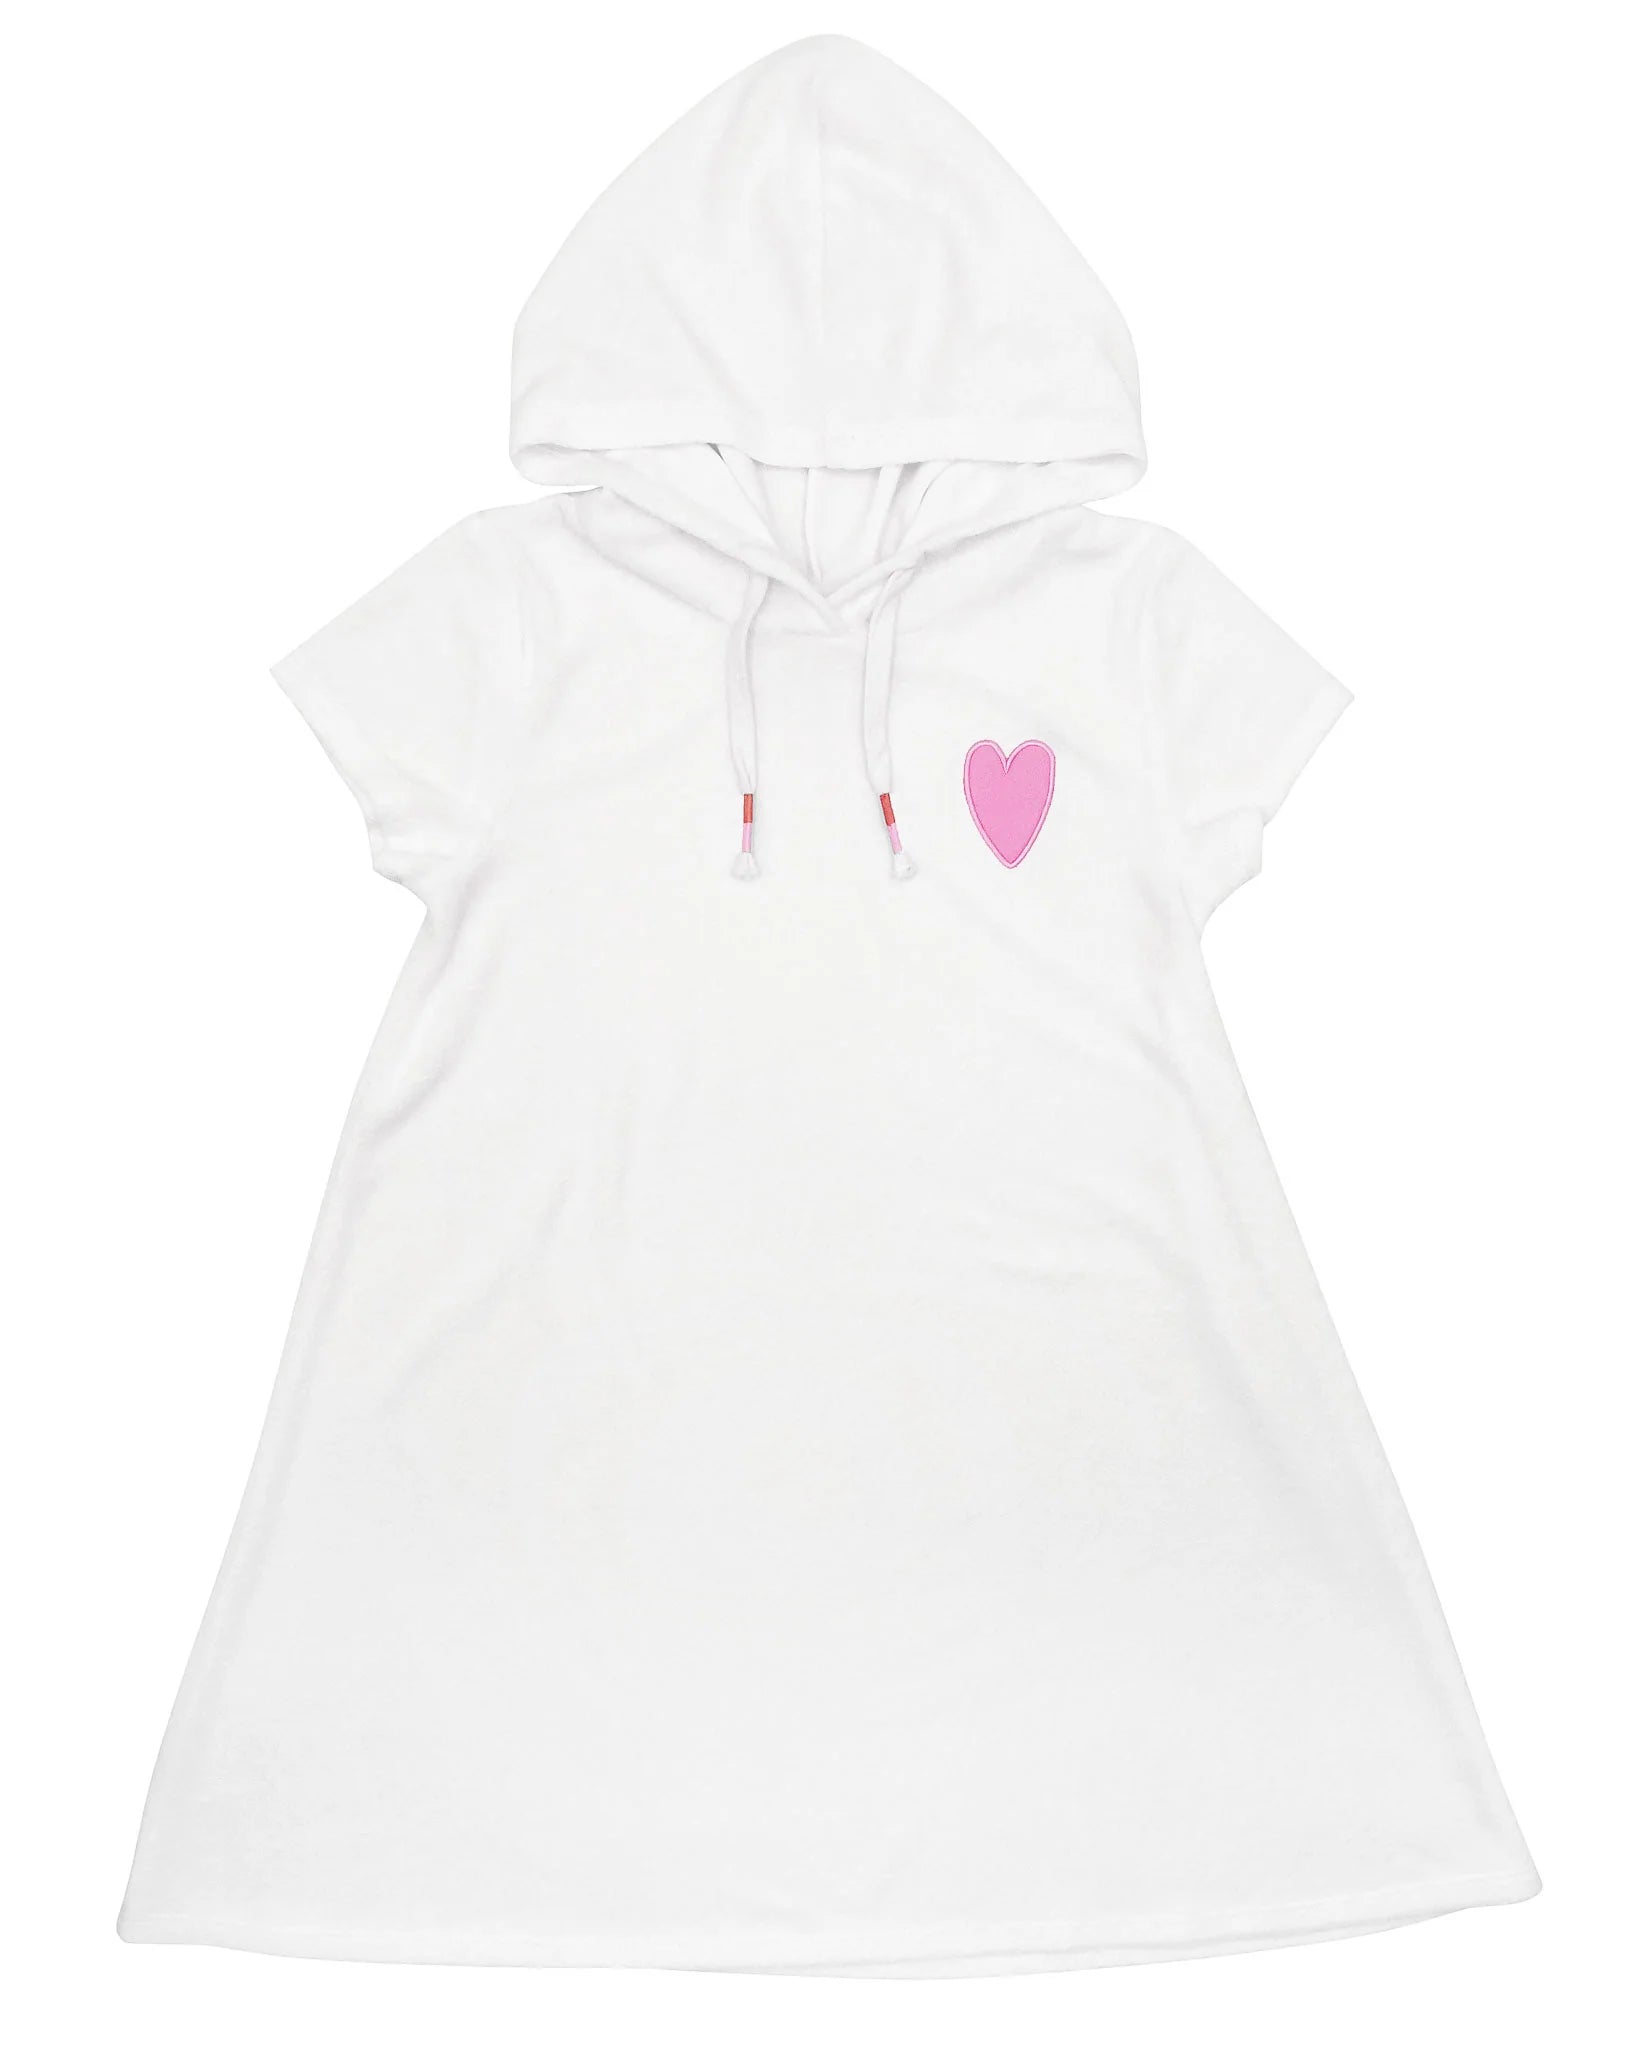 Summer Vibes Beach Cover-Up  - Doodlebug's Children's Boutique